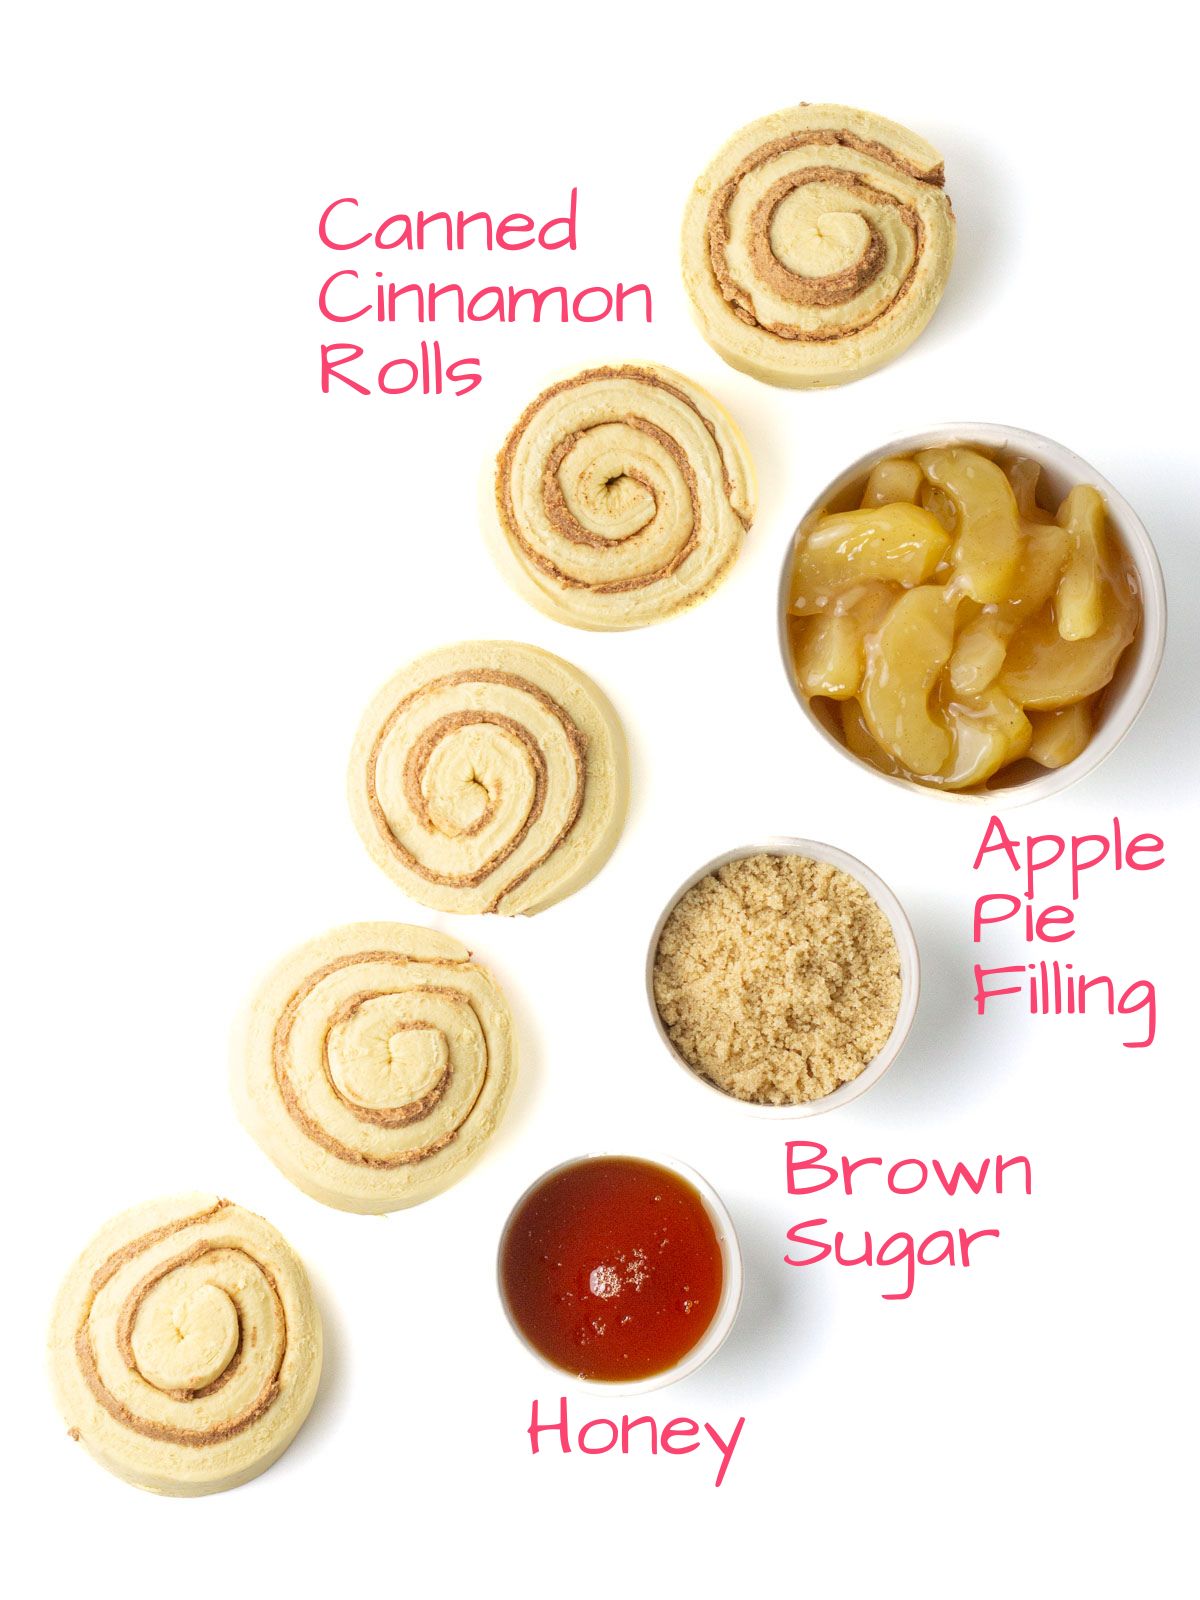 Ingredients needed to make cinnamon rolls with apple pie filling.